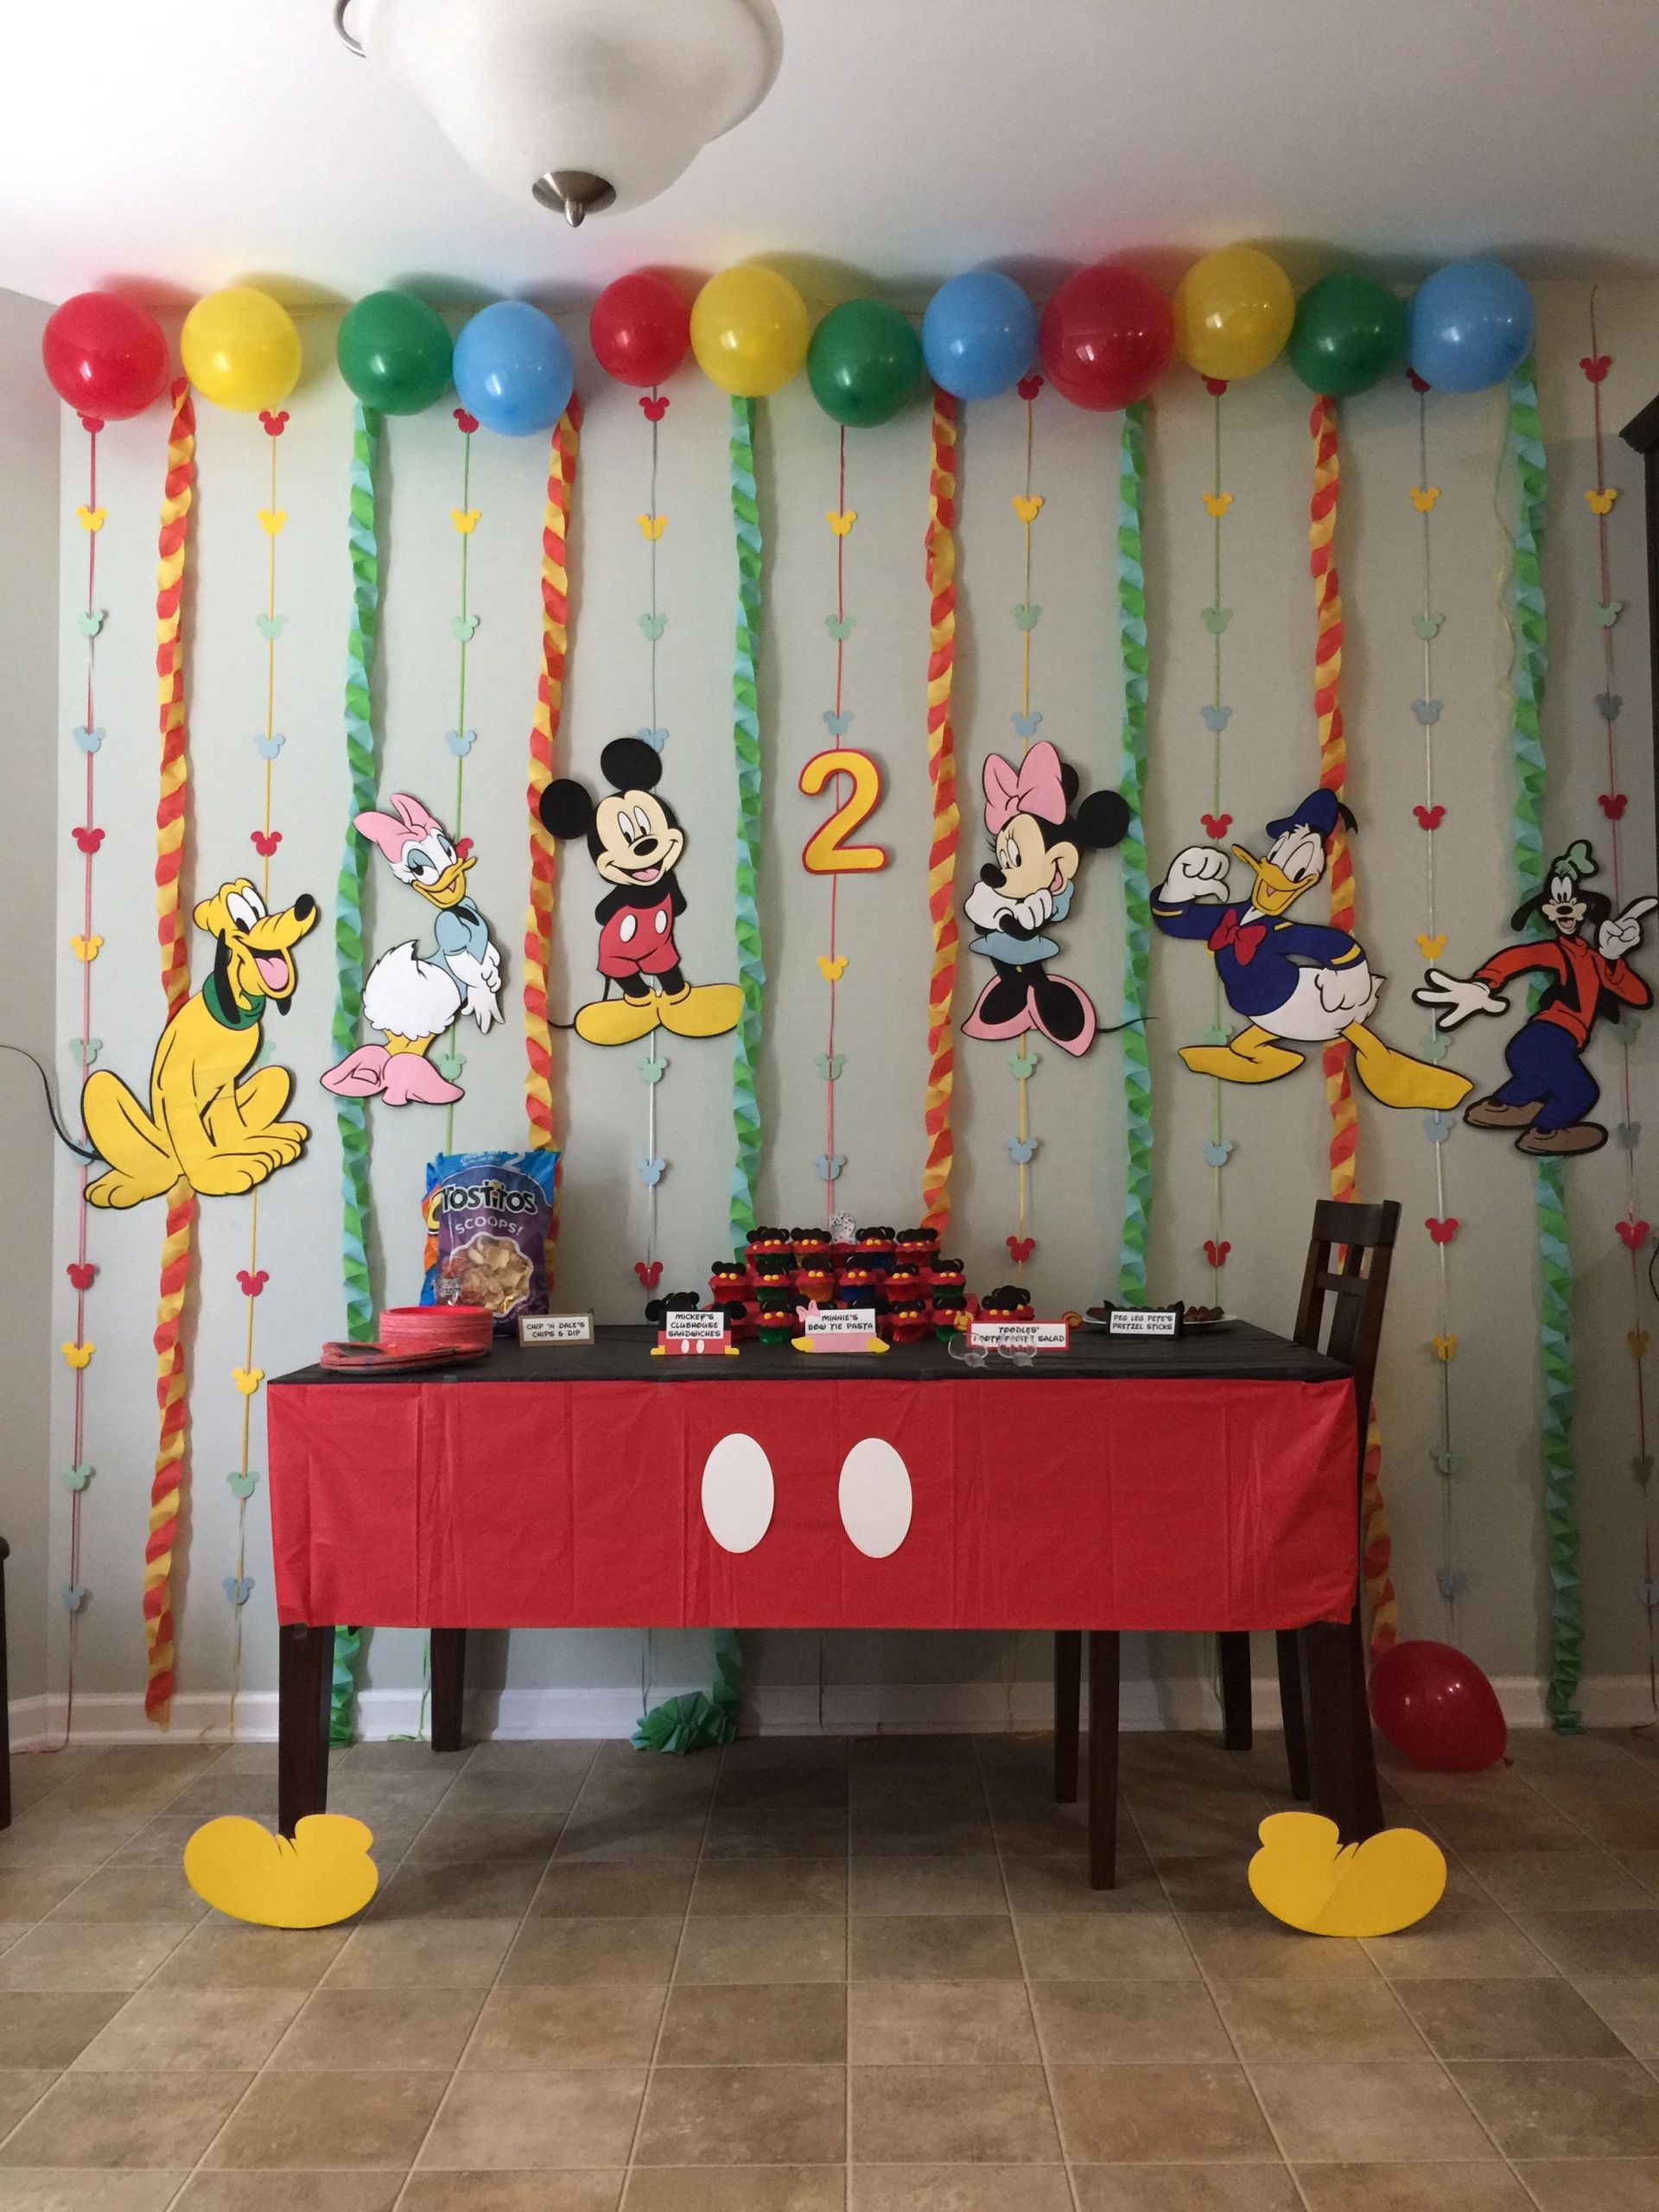 Mickey Mouse Clubhouse 1st Birthday Party
 Mickey Mouse Clubhouse Party